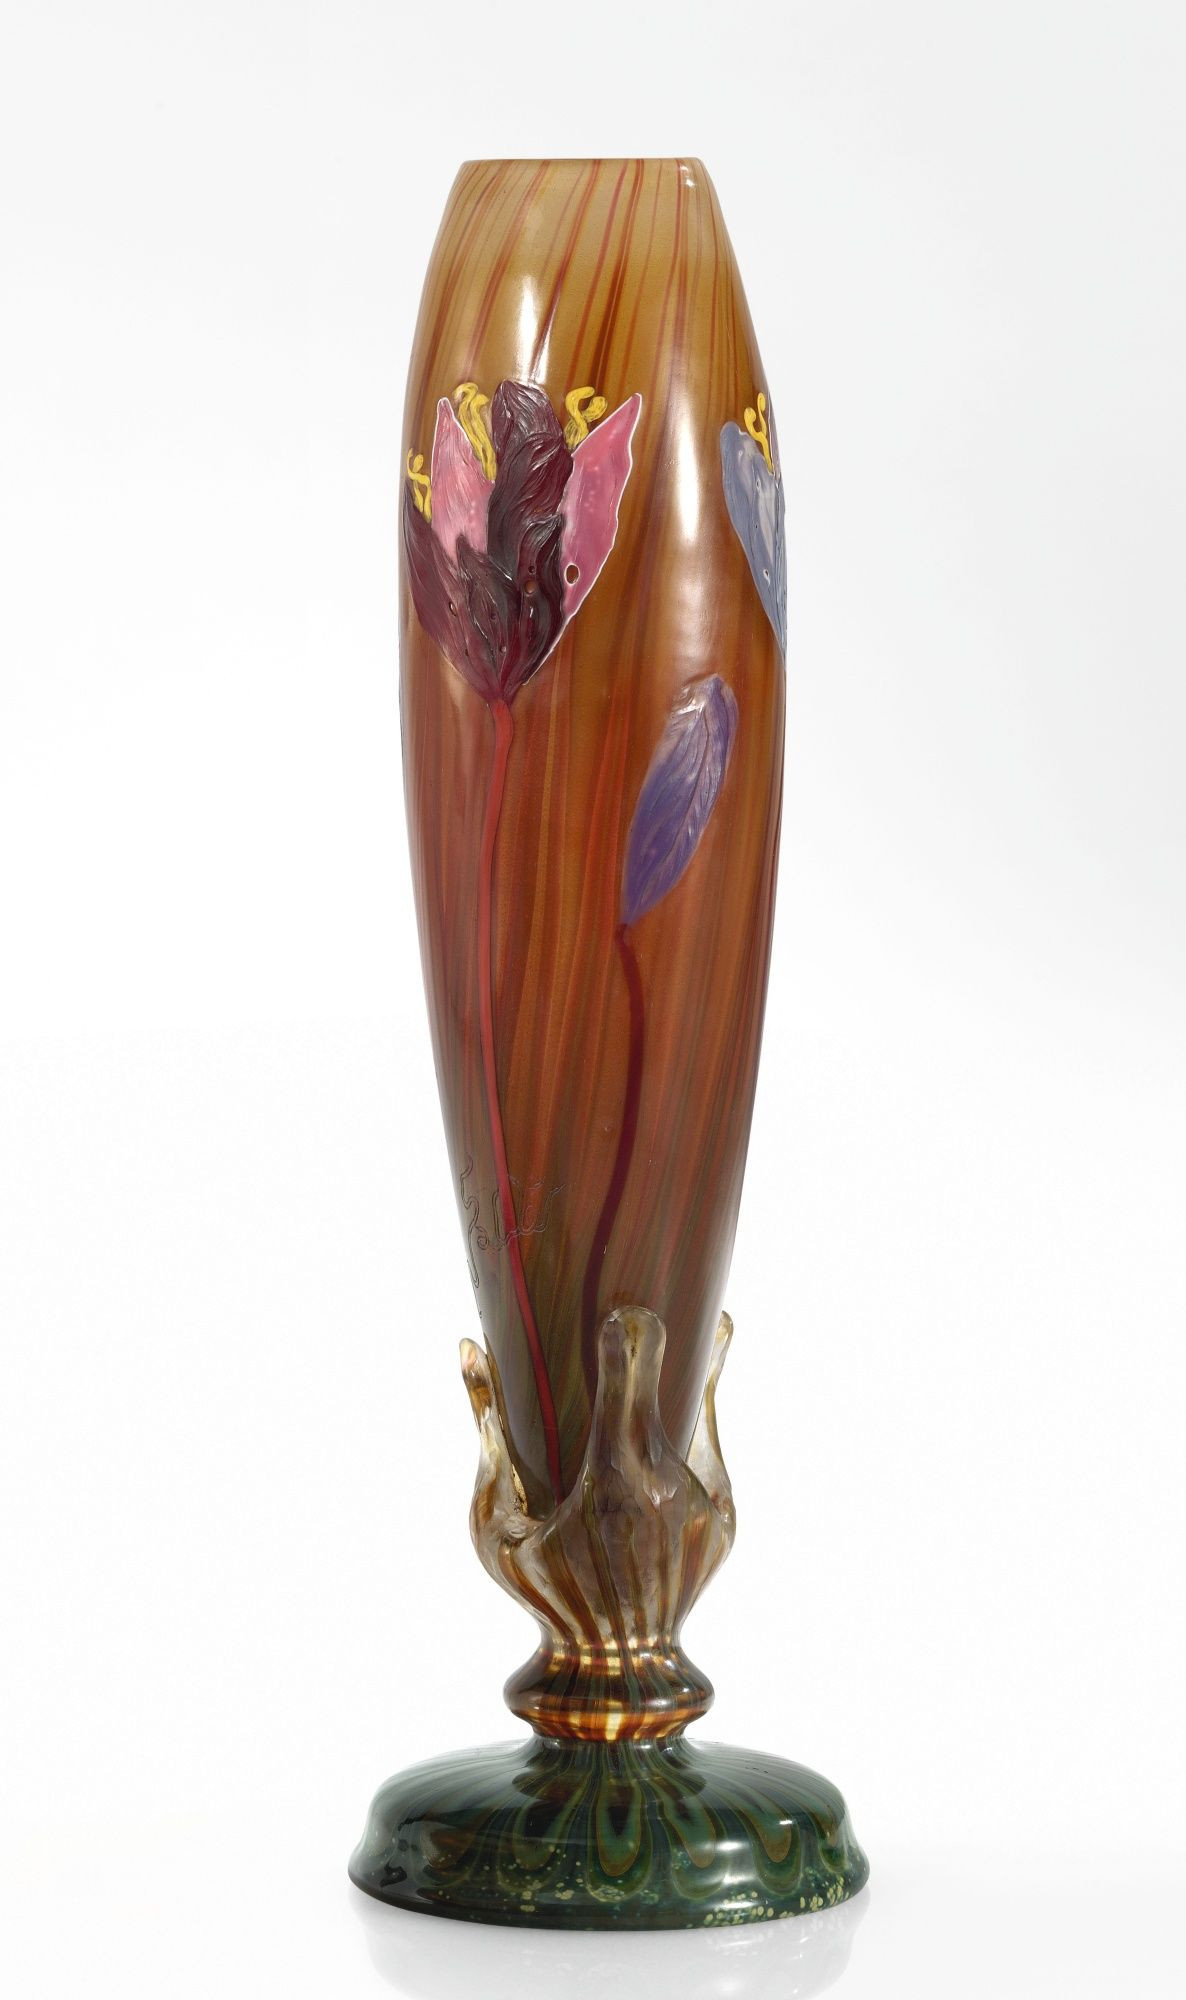 15 Cute Modern Art Glass Vase 2024 free download modern art glass vase of emile galla crocus vase signed galla internally decorated with with emile galla crocus vase signed galla internally decorated with wheel carved cameo glass and marqu